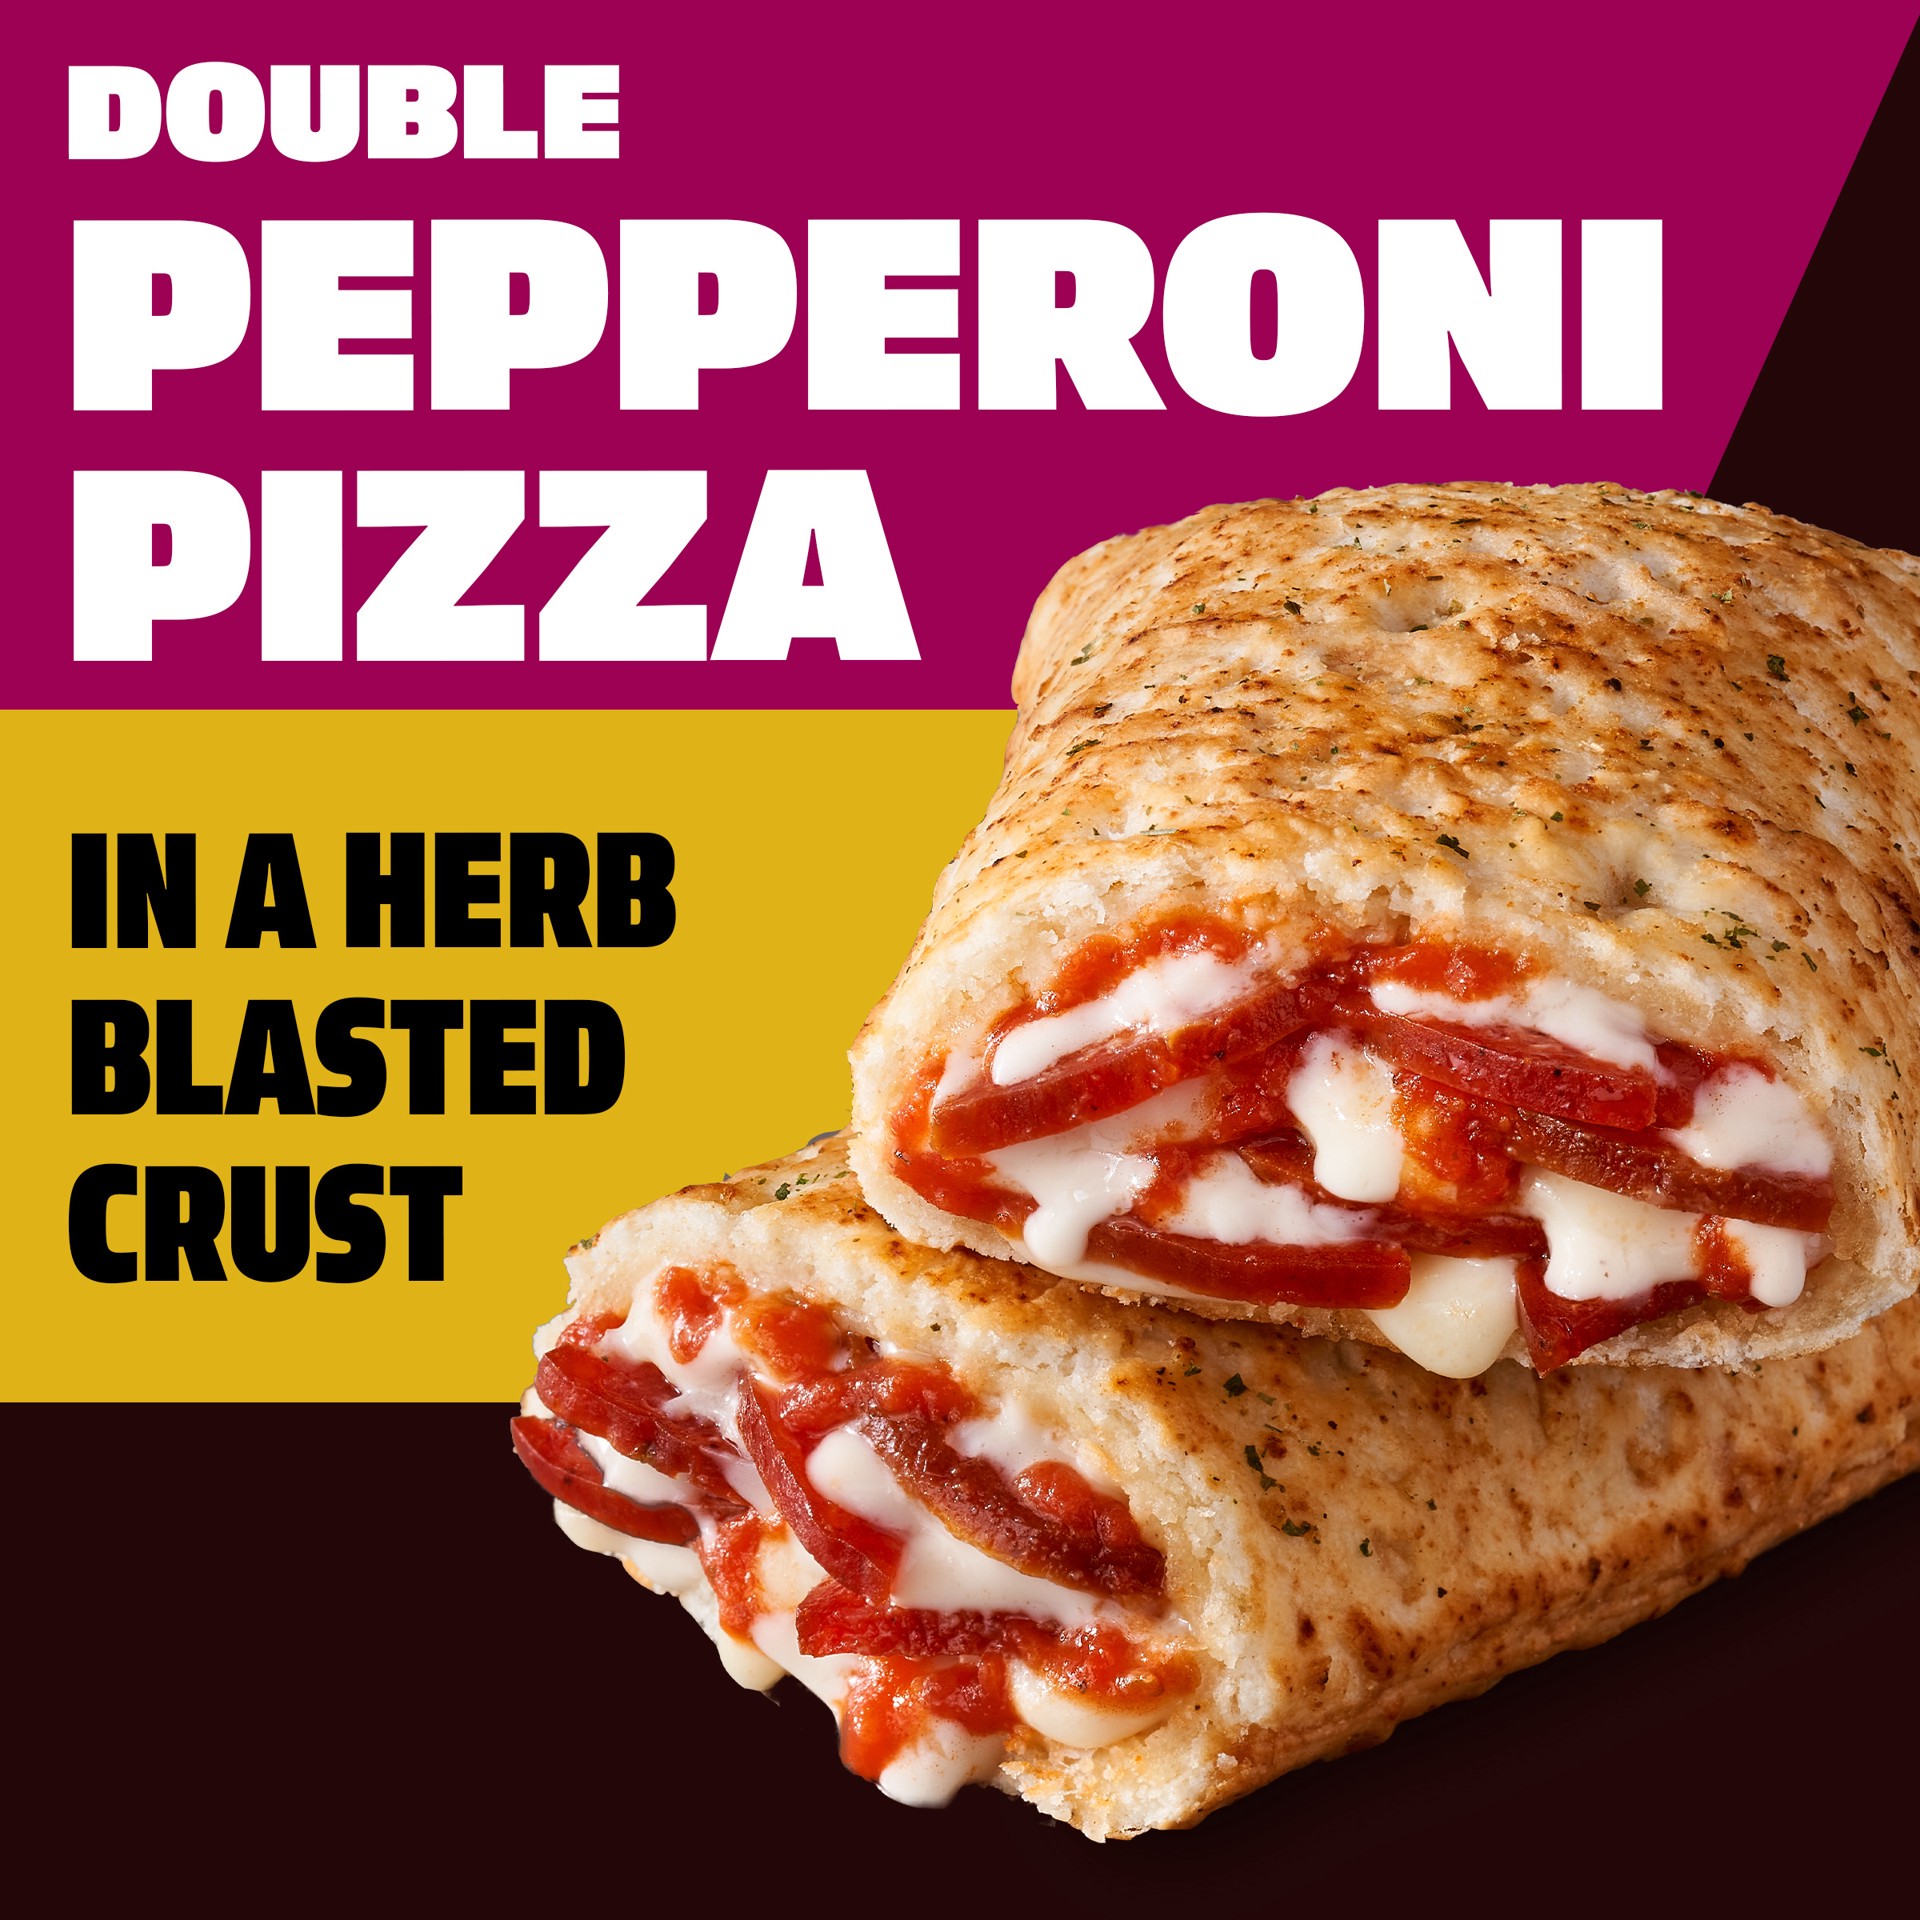 slide 3 of 3, Hot Pockets Big & Bold Double Pepperoni Pizza Frozen Snacks in a Herb Blasted Crust, Pizza Snacks Made with Reduced Fat Mozzarella Cheese, 2 Count Frozen Sandwiches, 13.5 oz